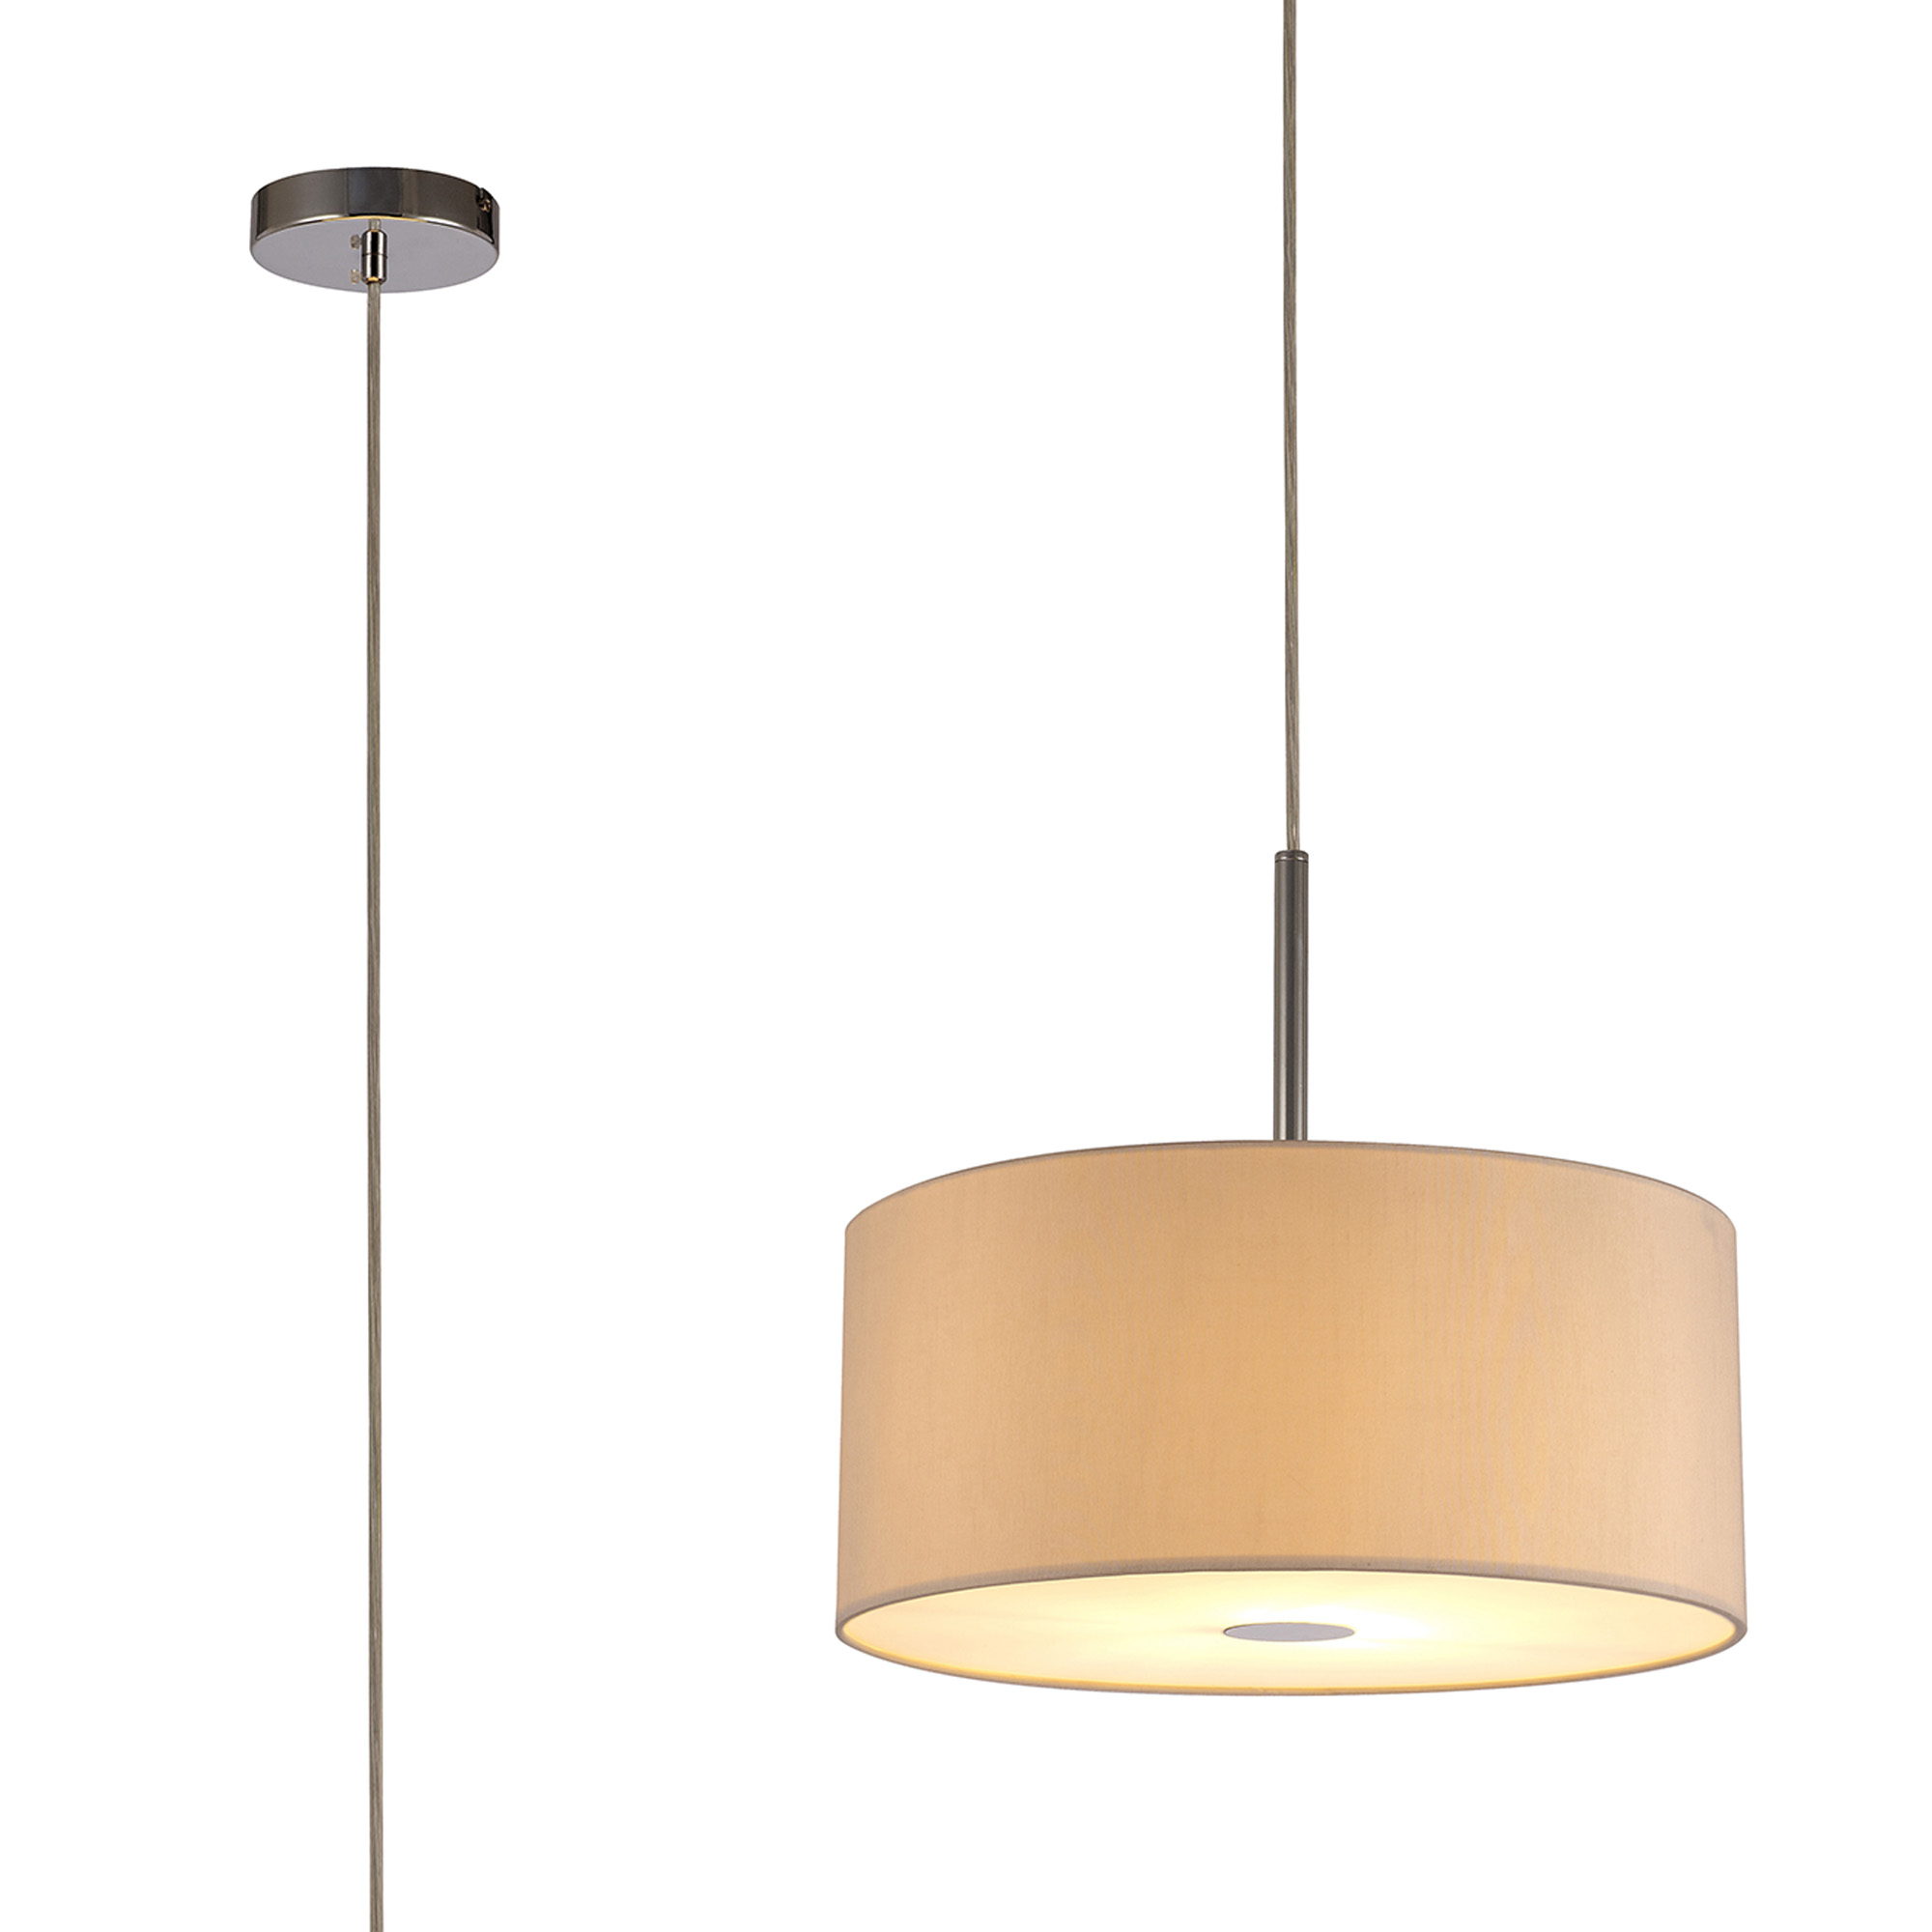 DK0136  Baymont 40cm Pendant 1 Light Polished Chrome; Nude Beige/Moonlight; Frosted Diffuser